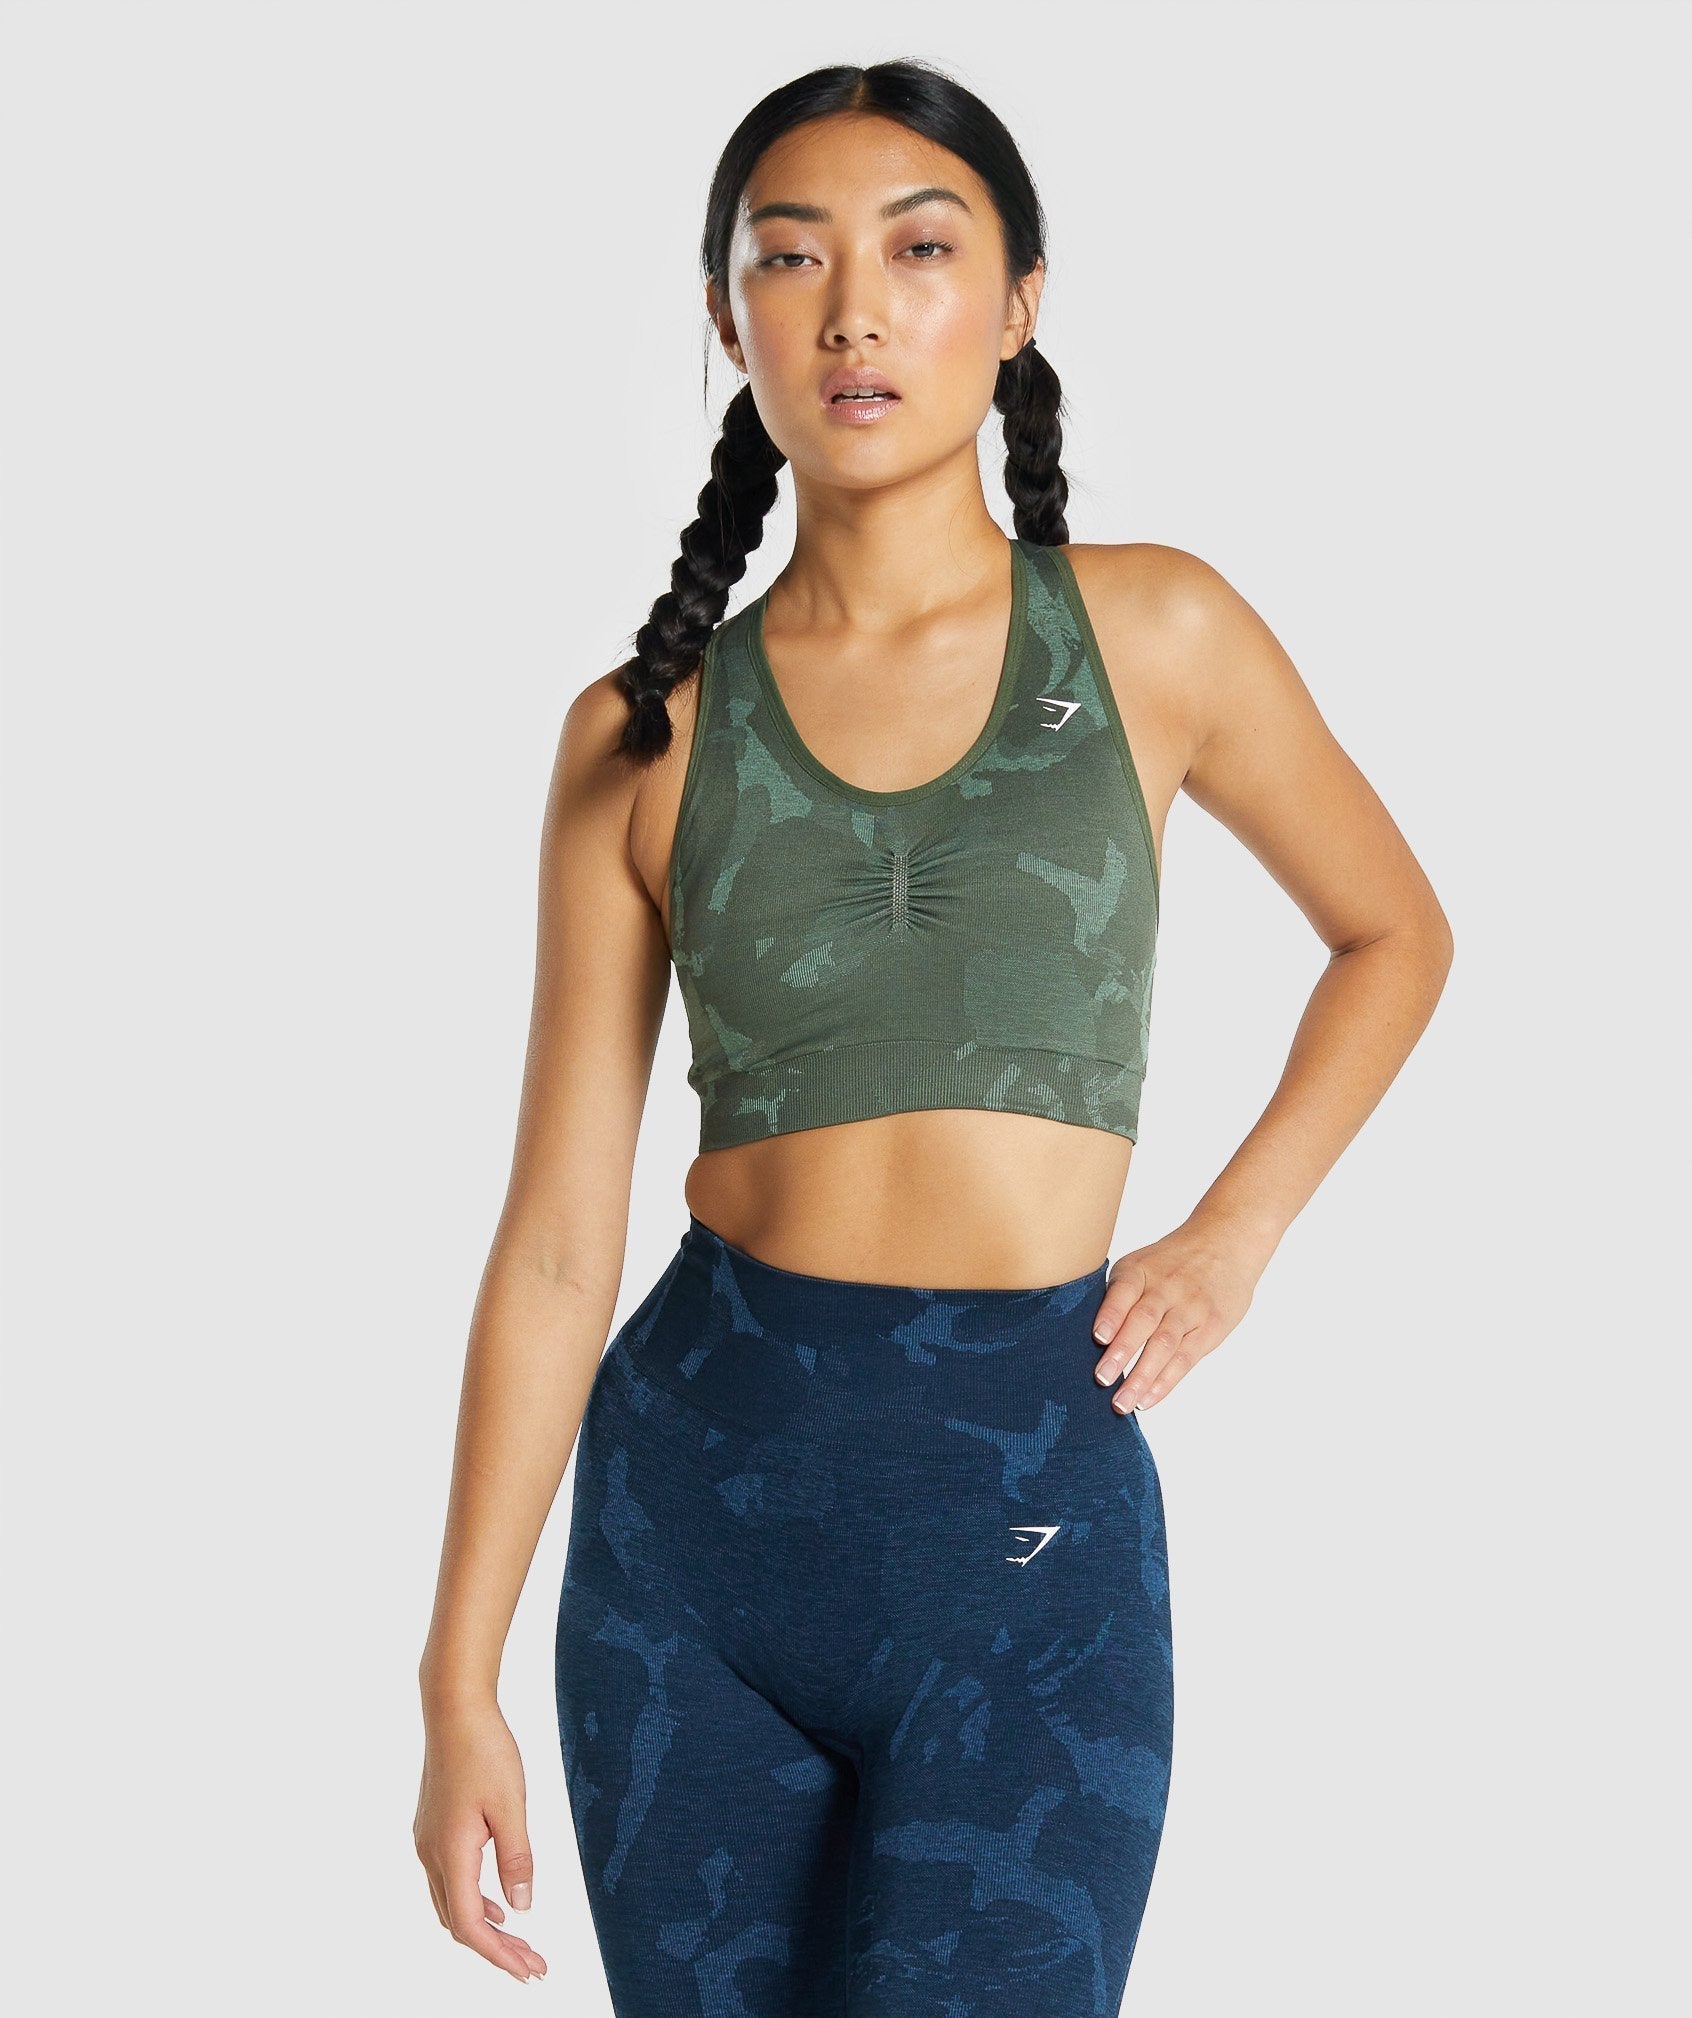 Adapt Camo Seamless Racer Back Sports Bra in {{variantColor} is out of stock